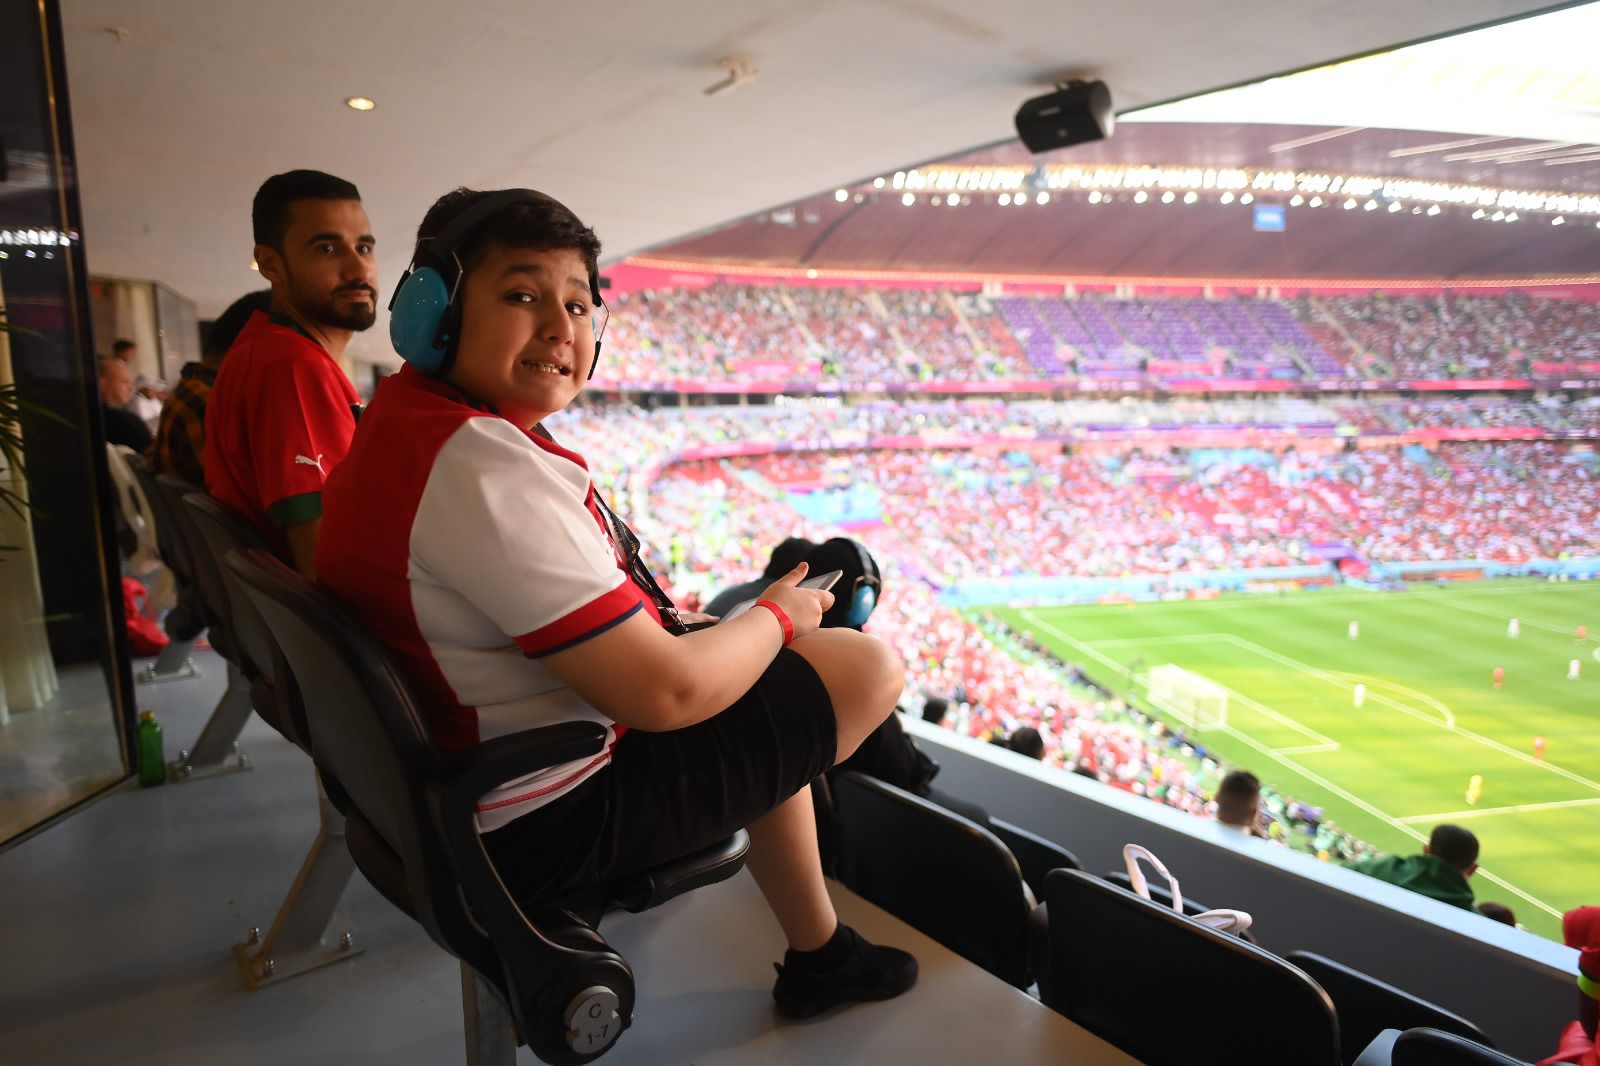 Audio Descriptive Commentary Gives Blind Fans Exceptional World Cup Experience